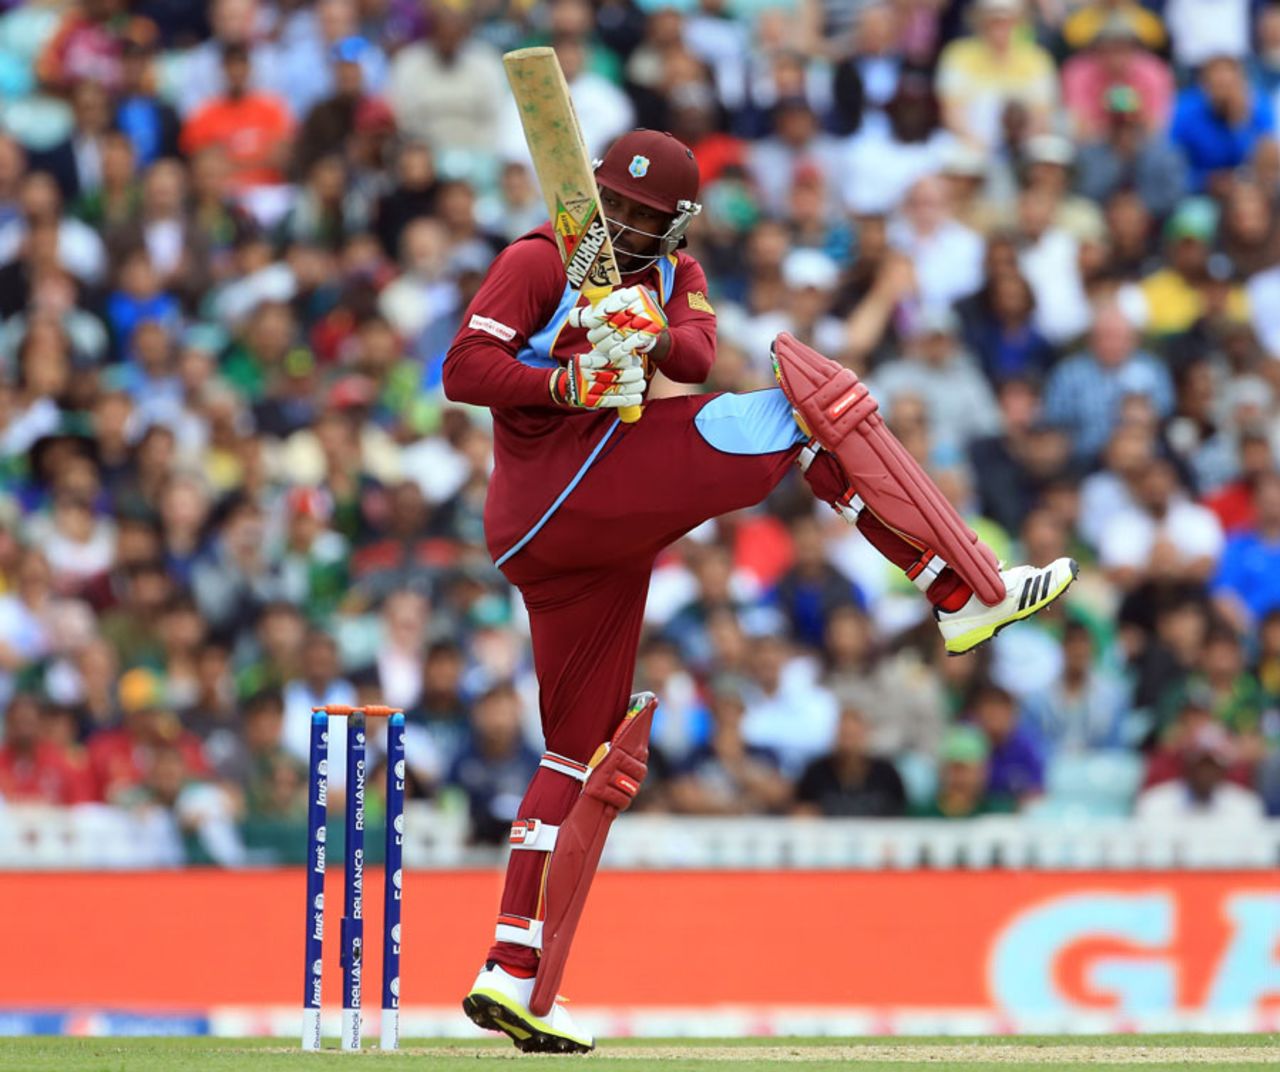 Chris Gayle pulls to the leg side boundary, West Indies v Pakistan, Champions Trophy, Group B, The Oval, June 7, 2013